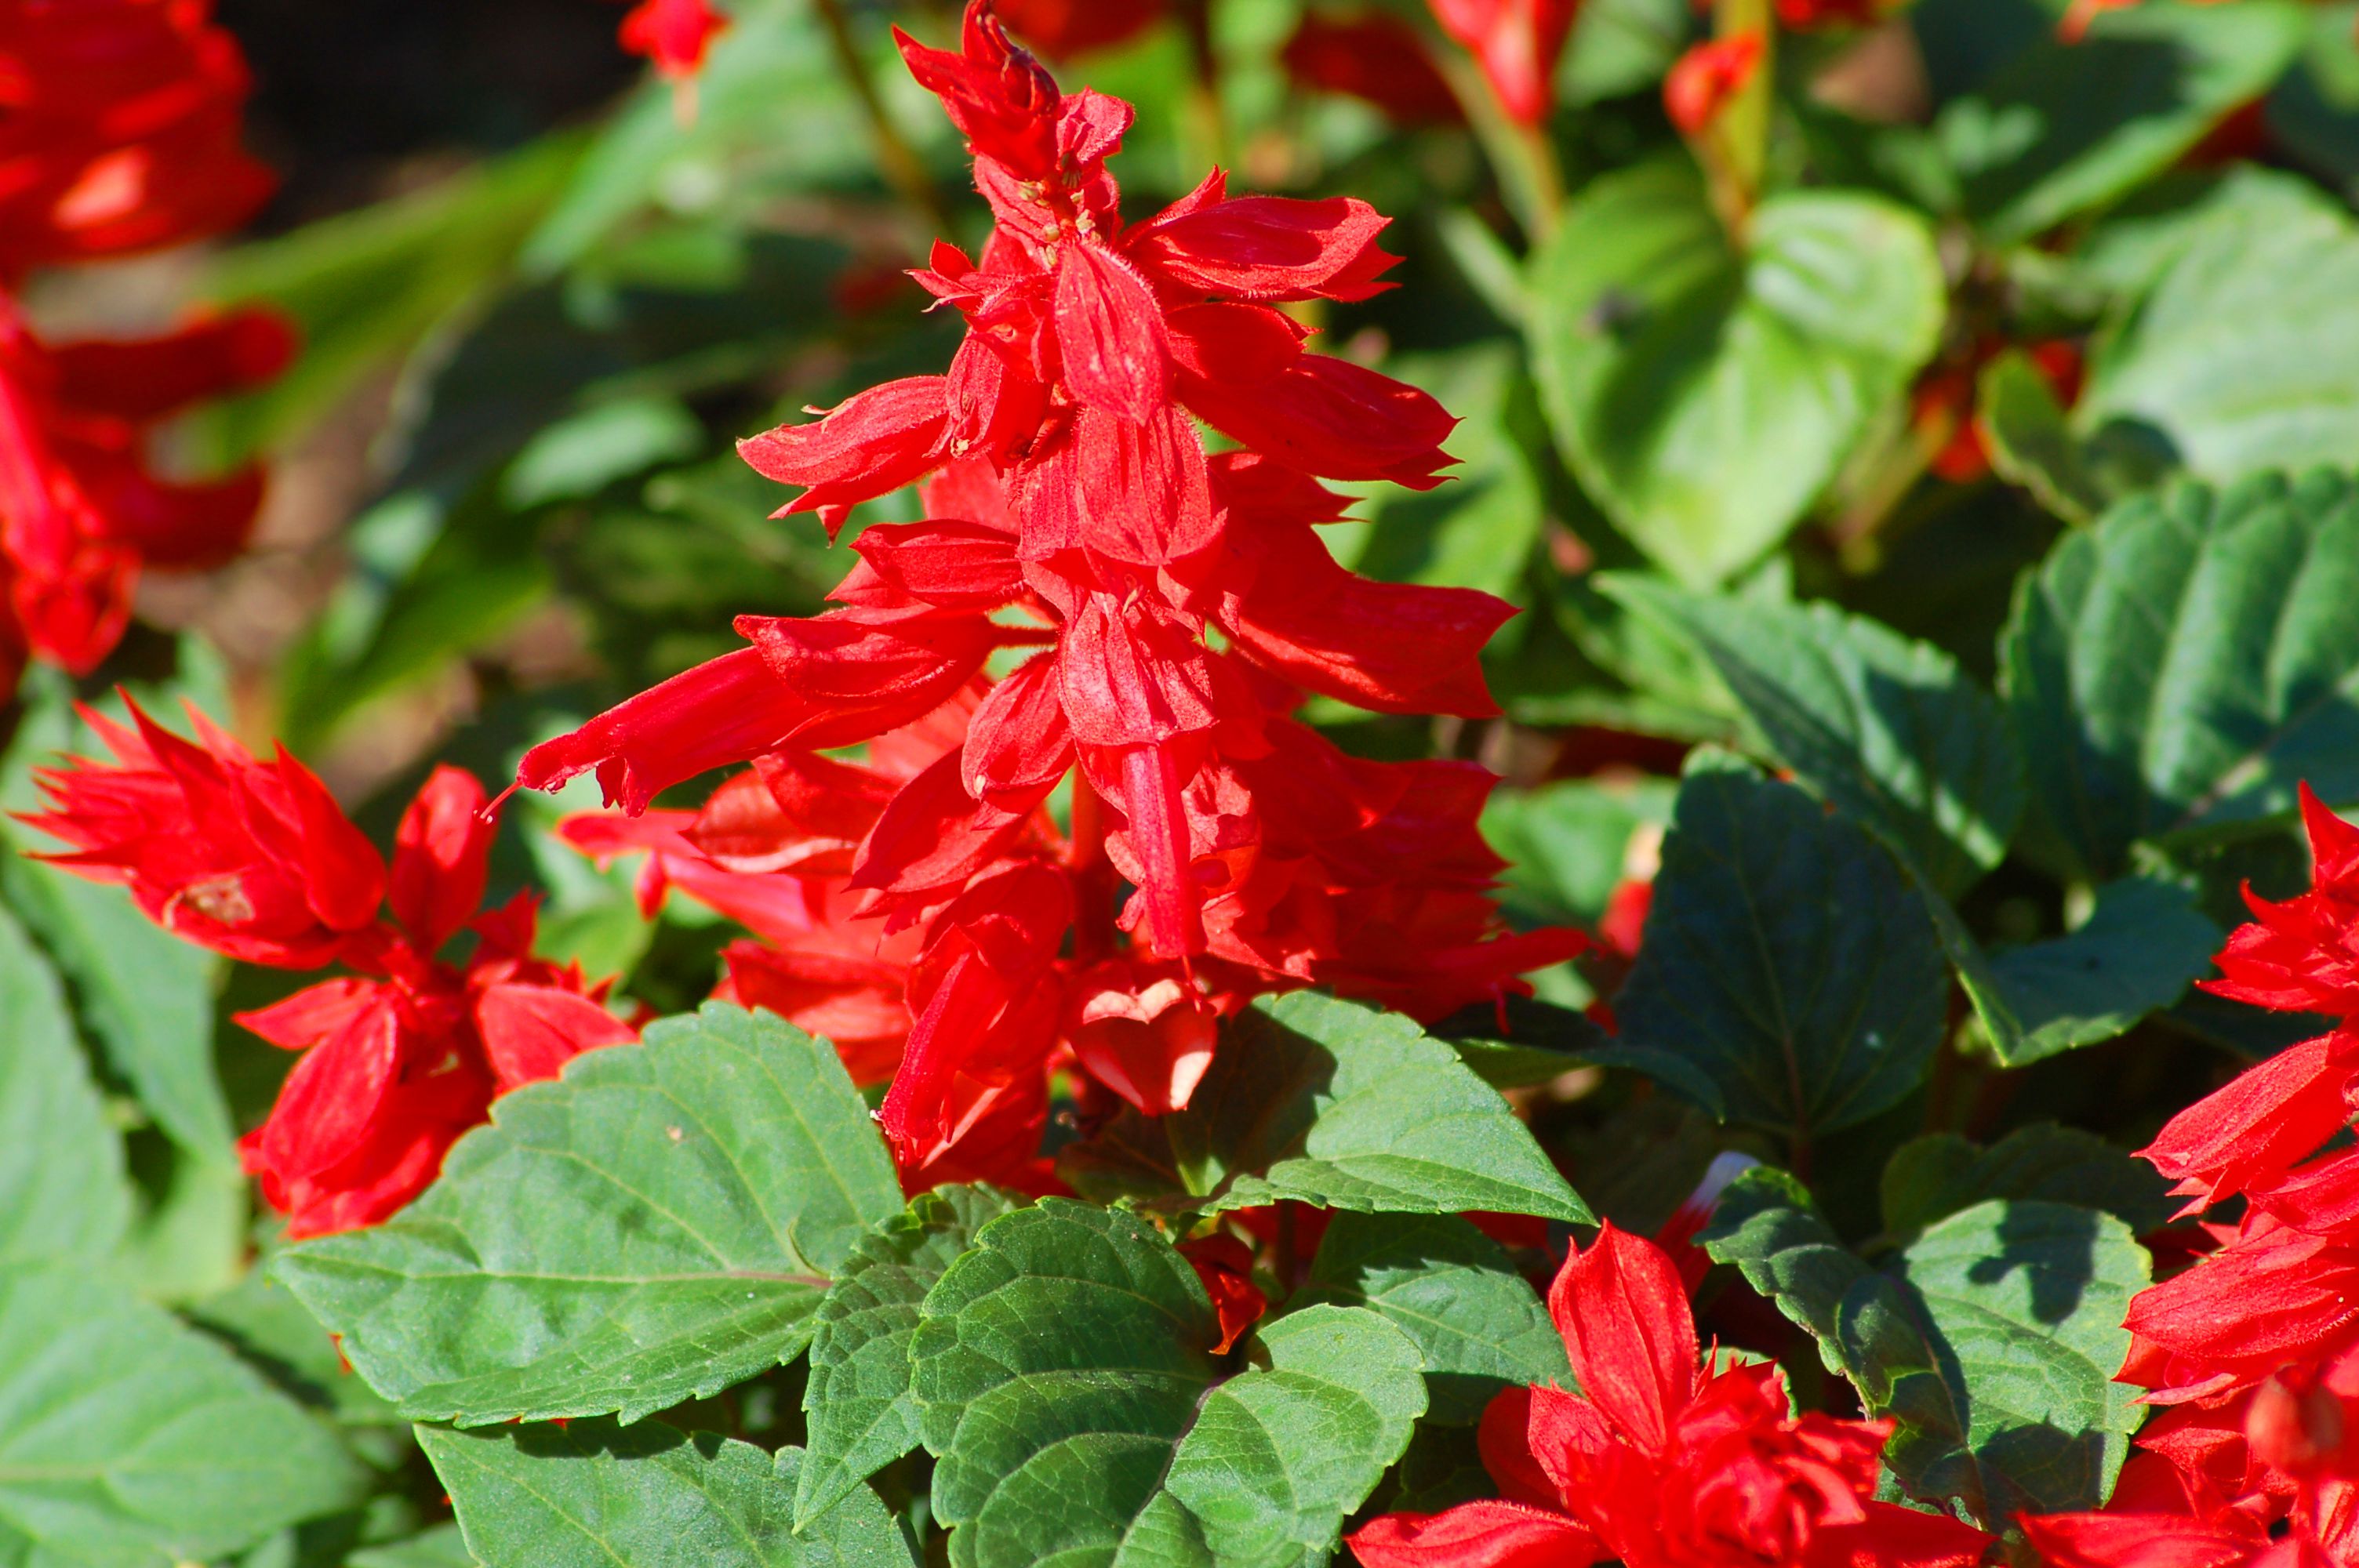 Red Salvia Flowers - How to Grow Scarlet Sage Plants